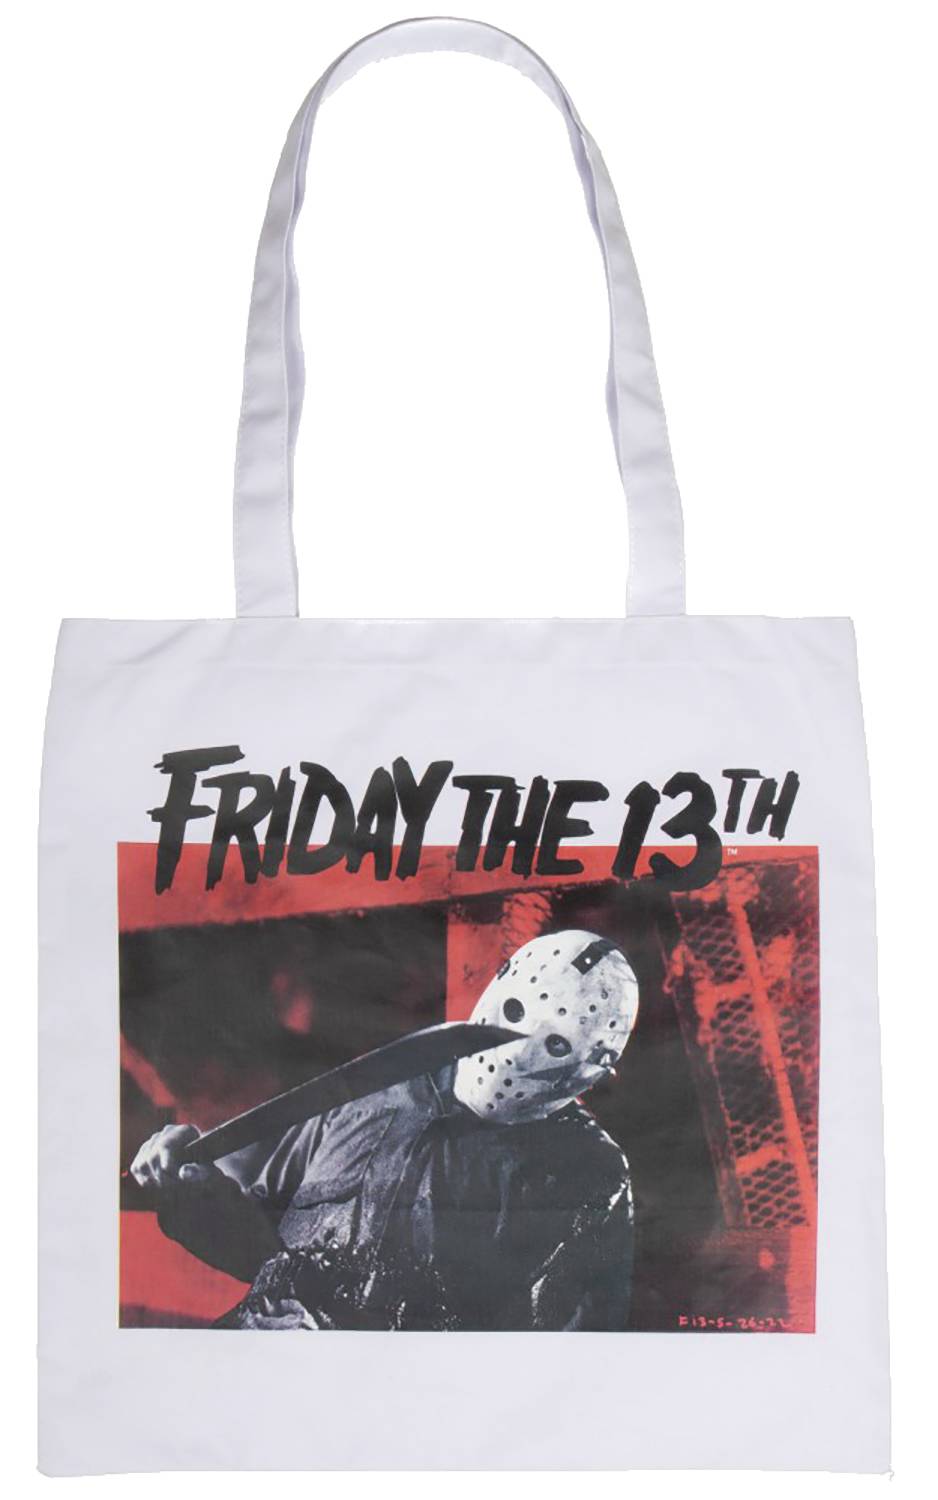 FRIDAY THE 13TH IMAGE CAPTURE CANVAS TOTE